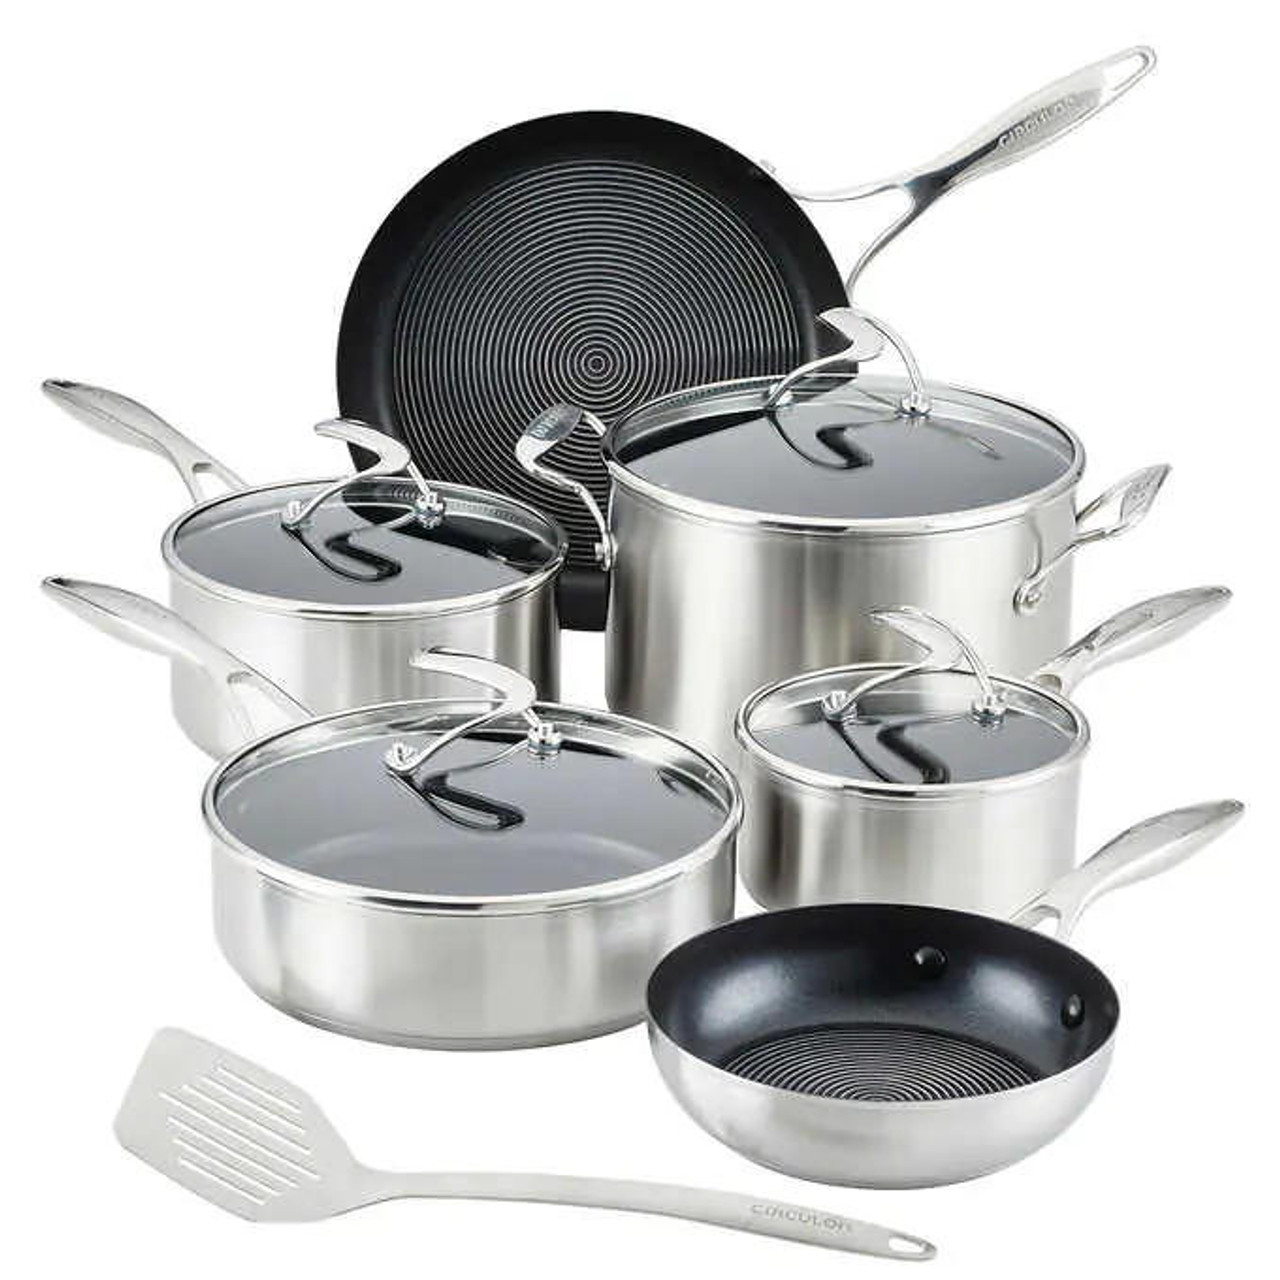 Circulon Momentum Stainless Steel Nonstick Cookware Set with Glass Lids,  11-Piece Pot and Pan Set, Stainless Steel